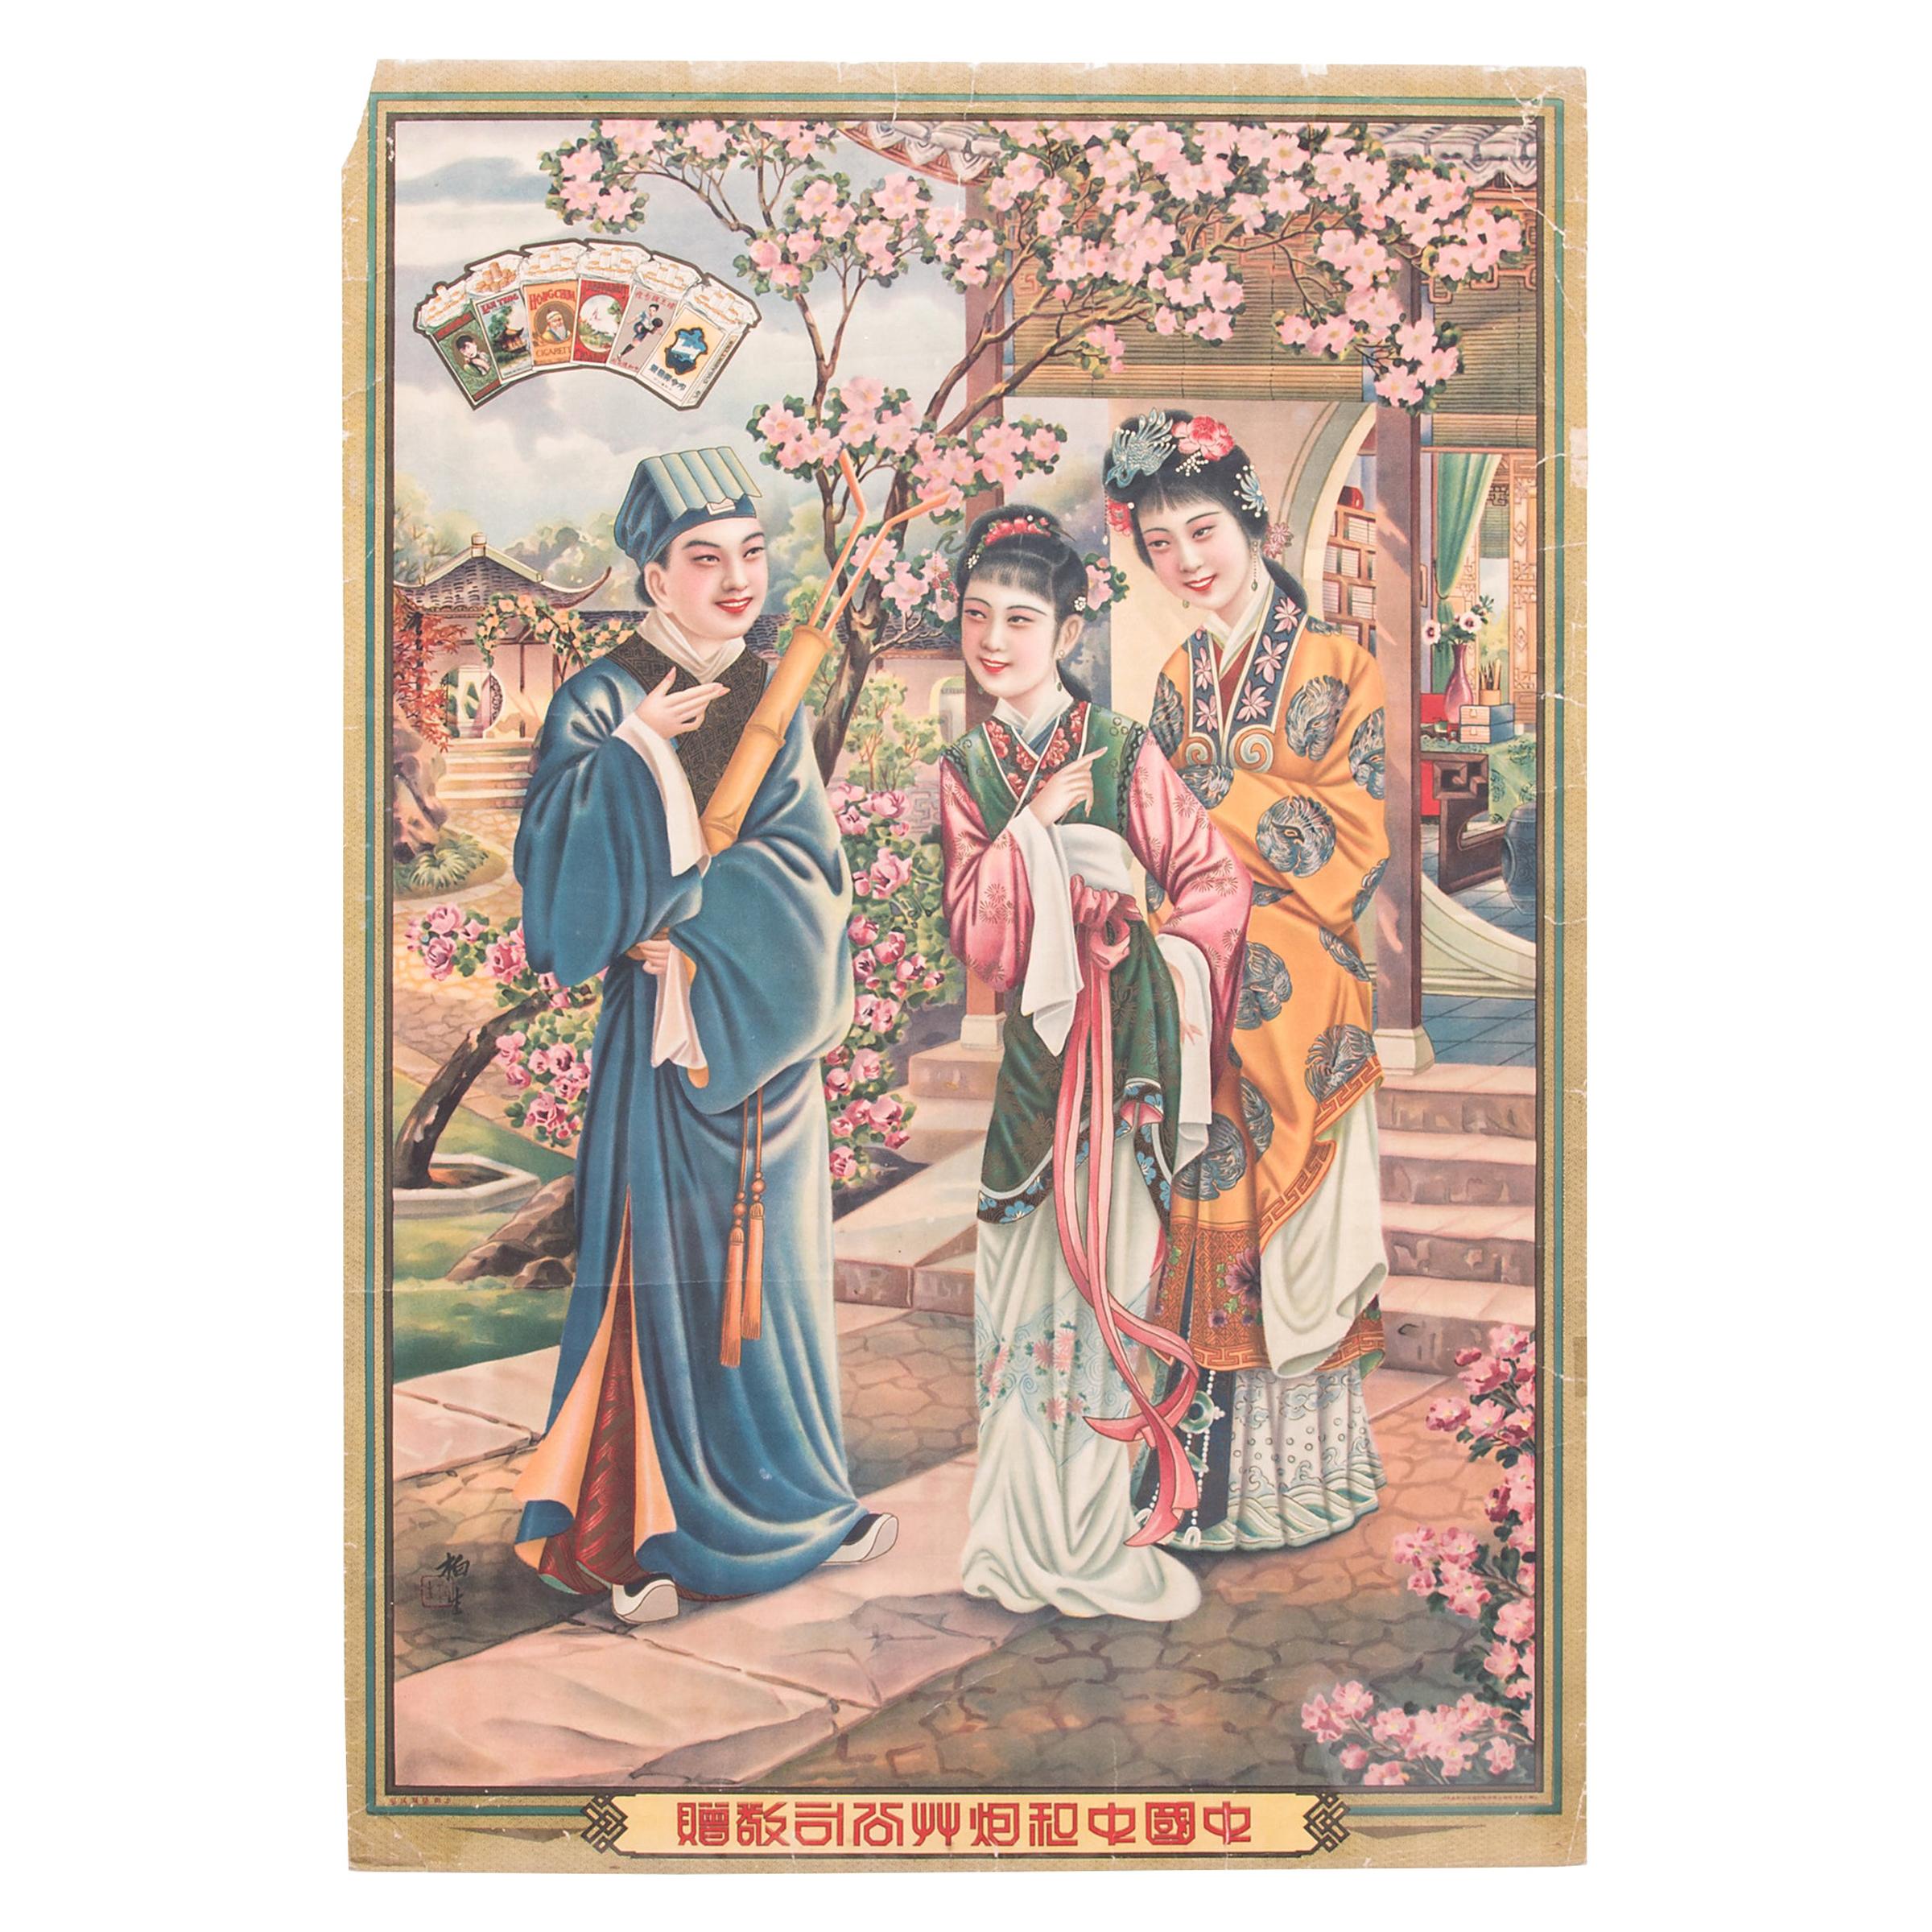 Vintage Chinese Cigarette Advertisement Poster, c. 1930s